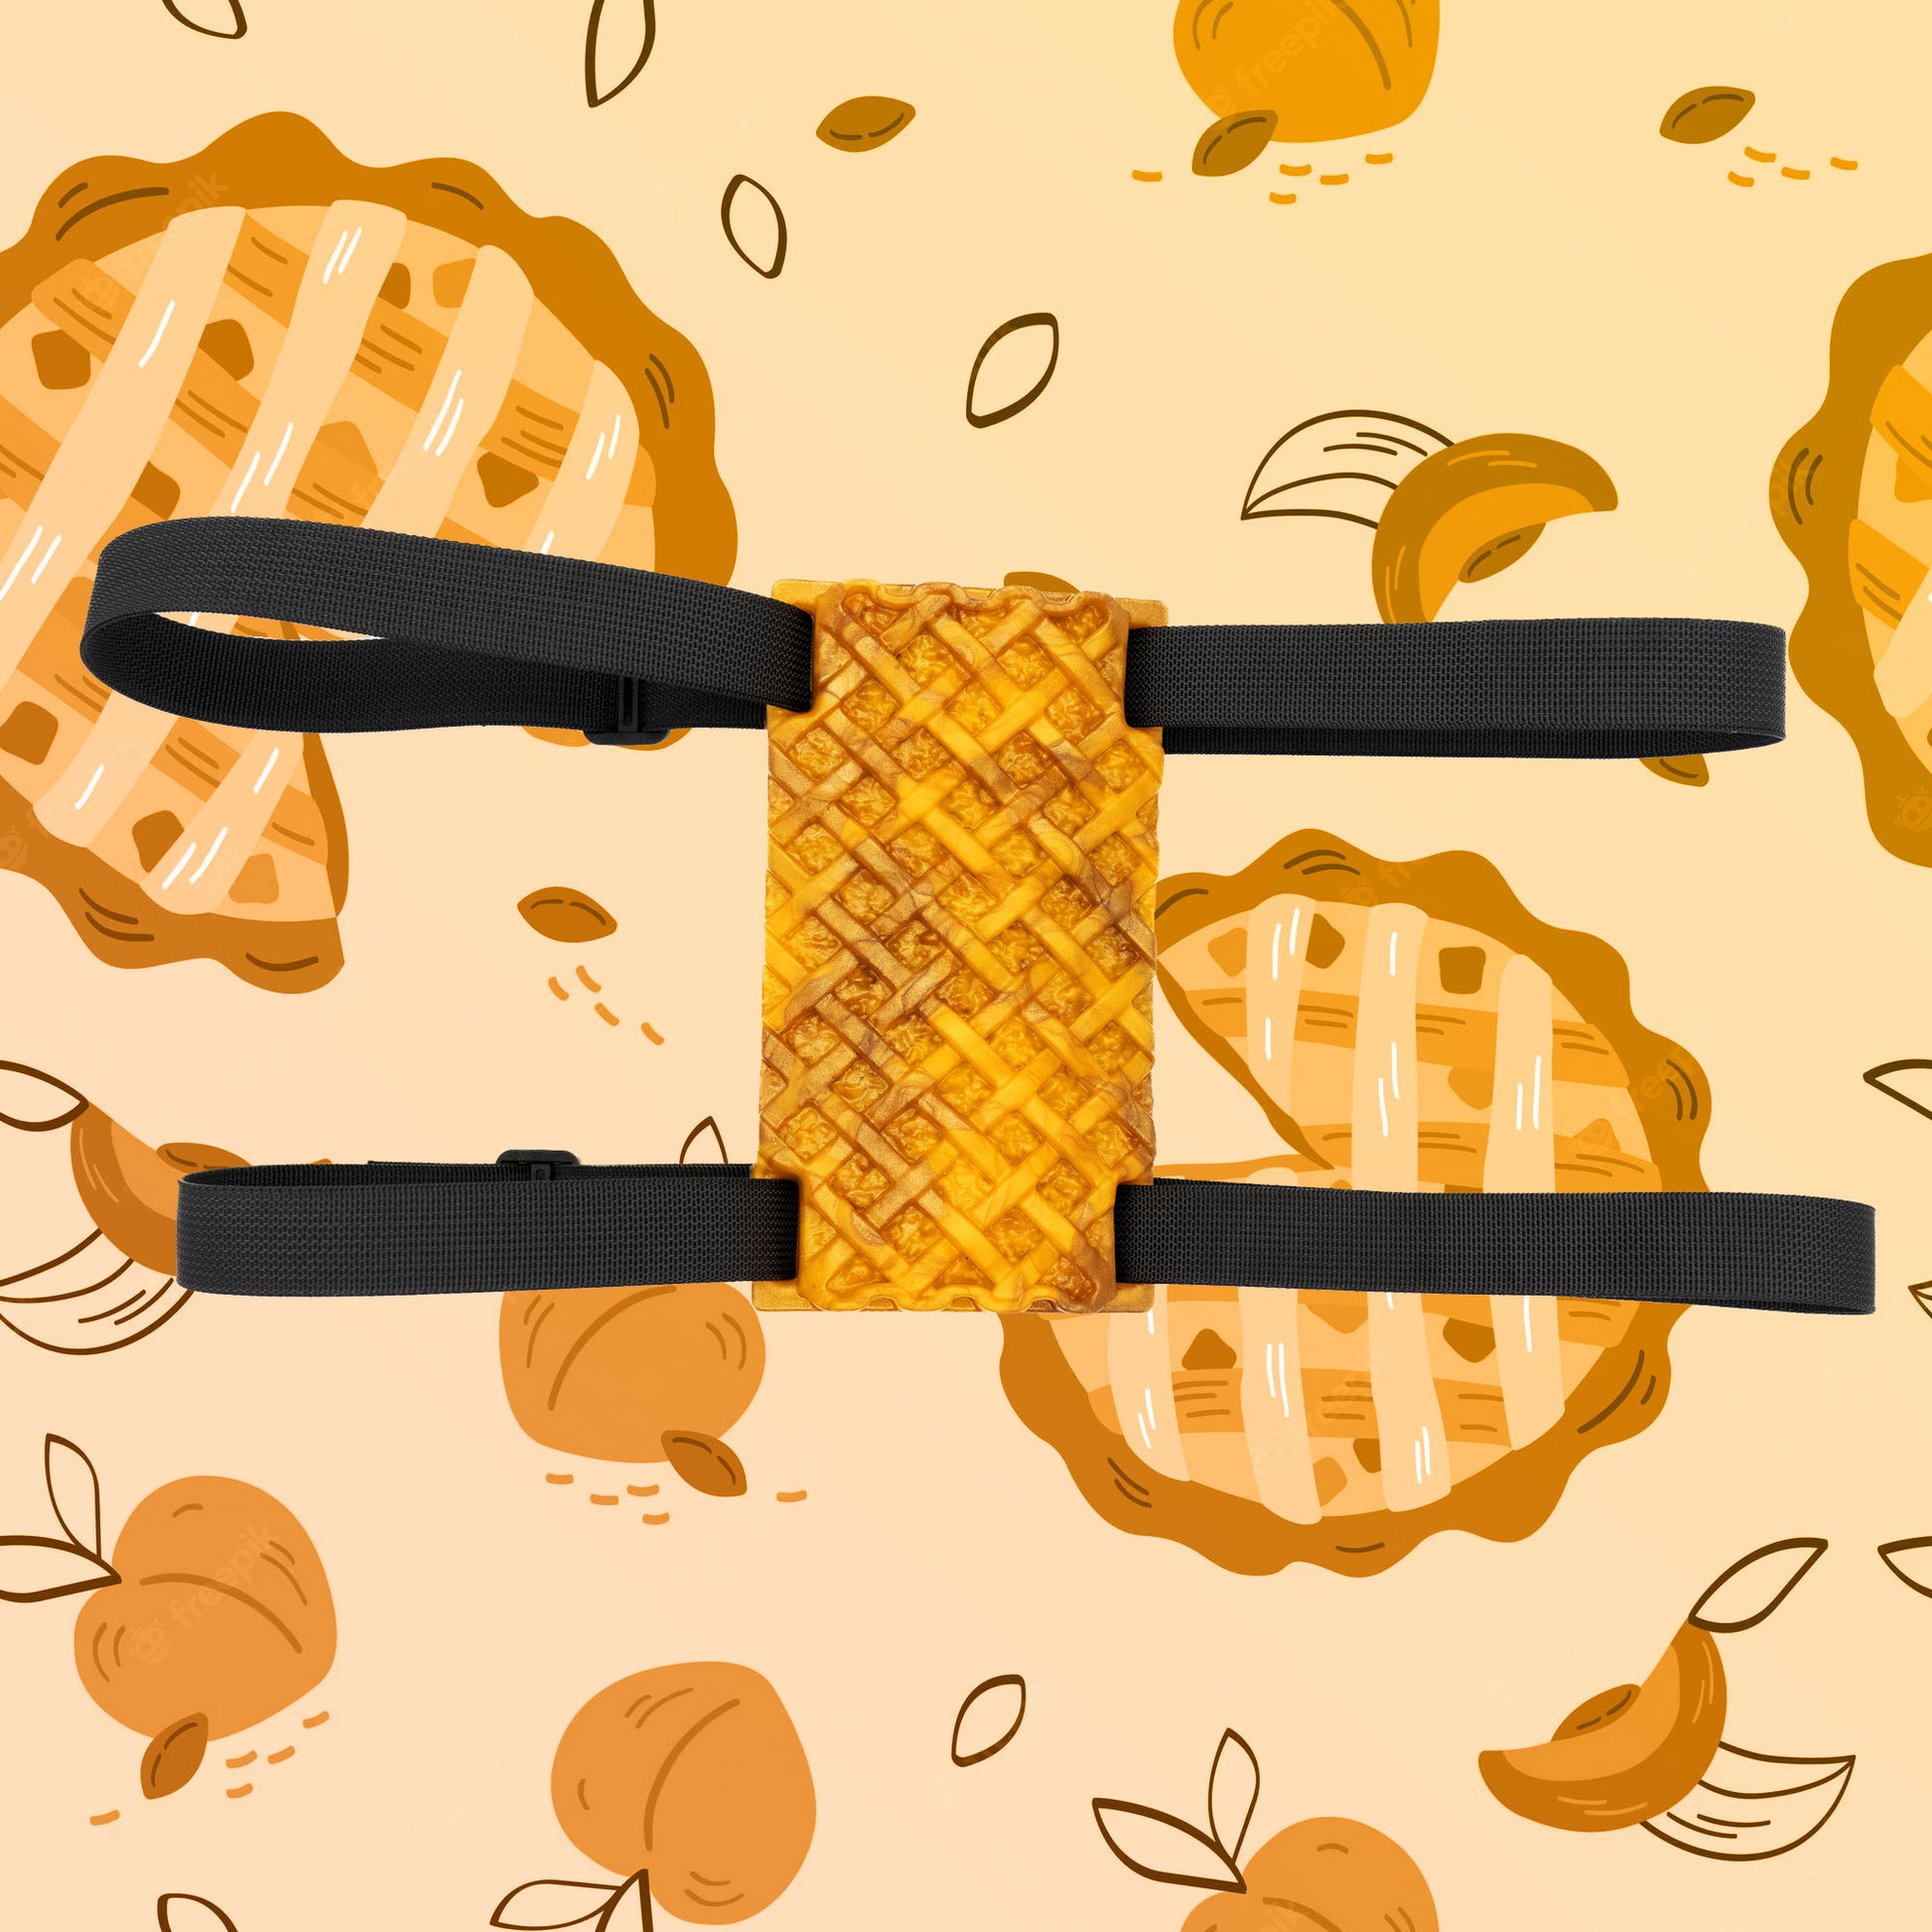 Our peach-pie inspired grinder sex toy.  Our grinder sex toys strap securely to any pillow, rolled-up blanket or towel, crafting the perfect sex saddle for your humping and grinding pleasures. 